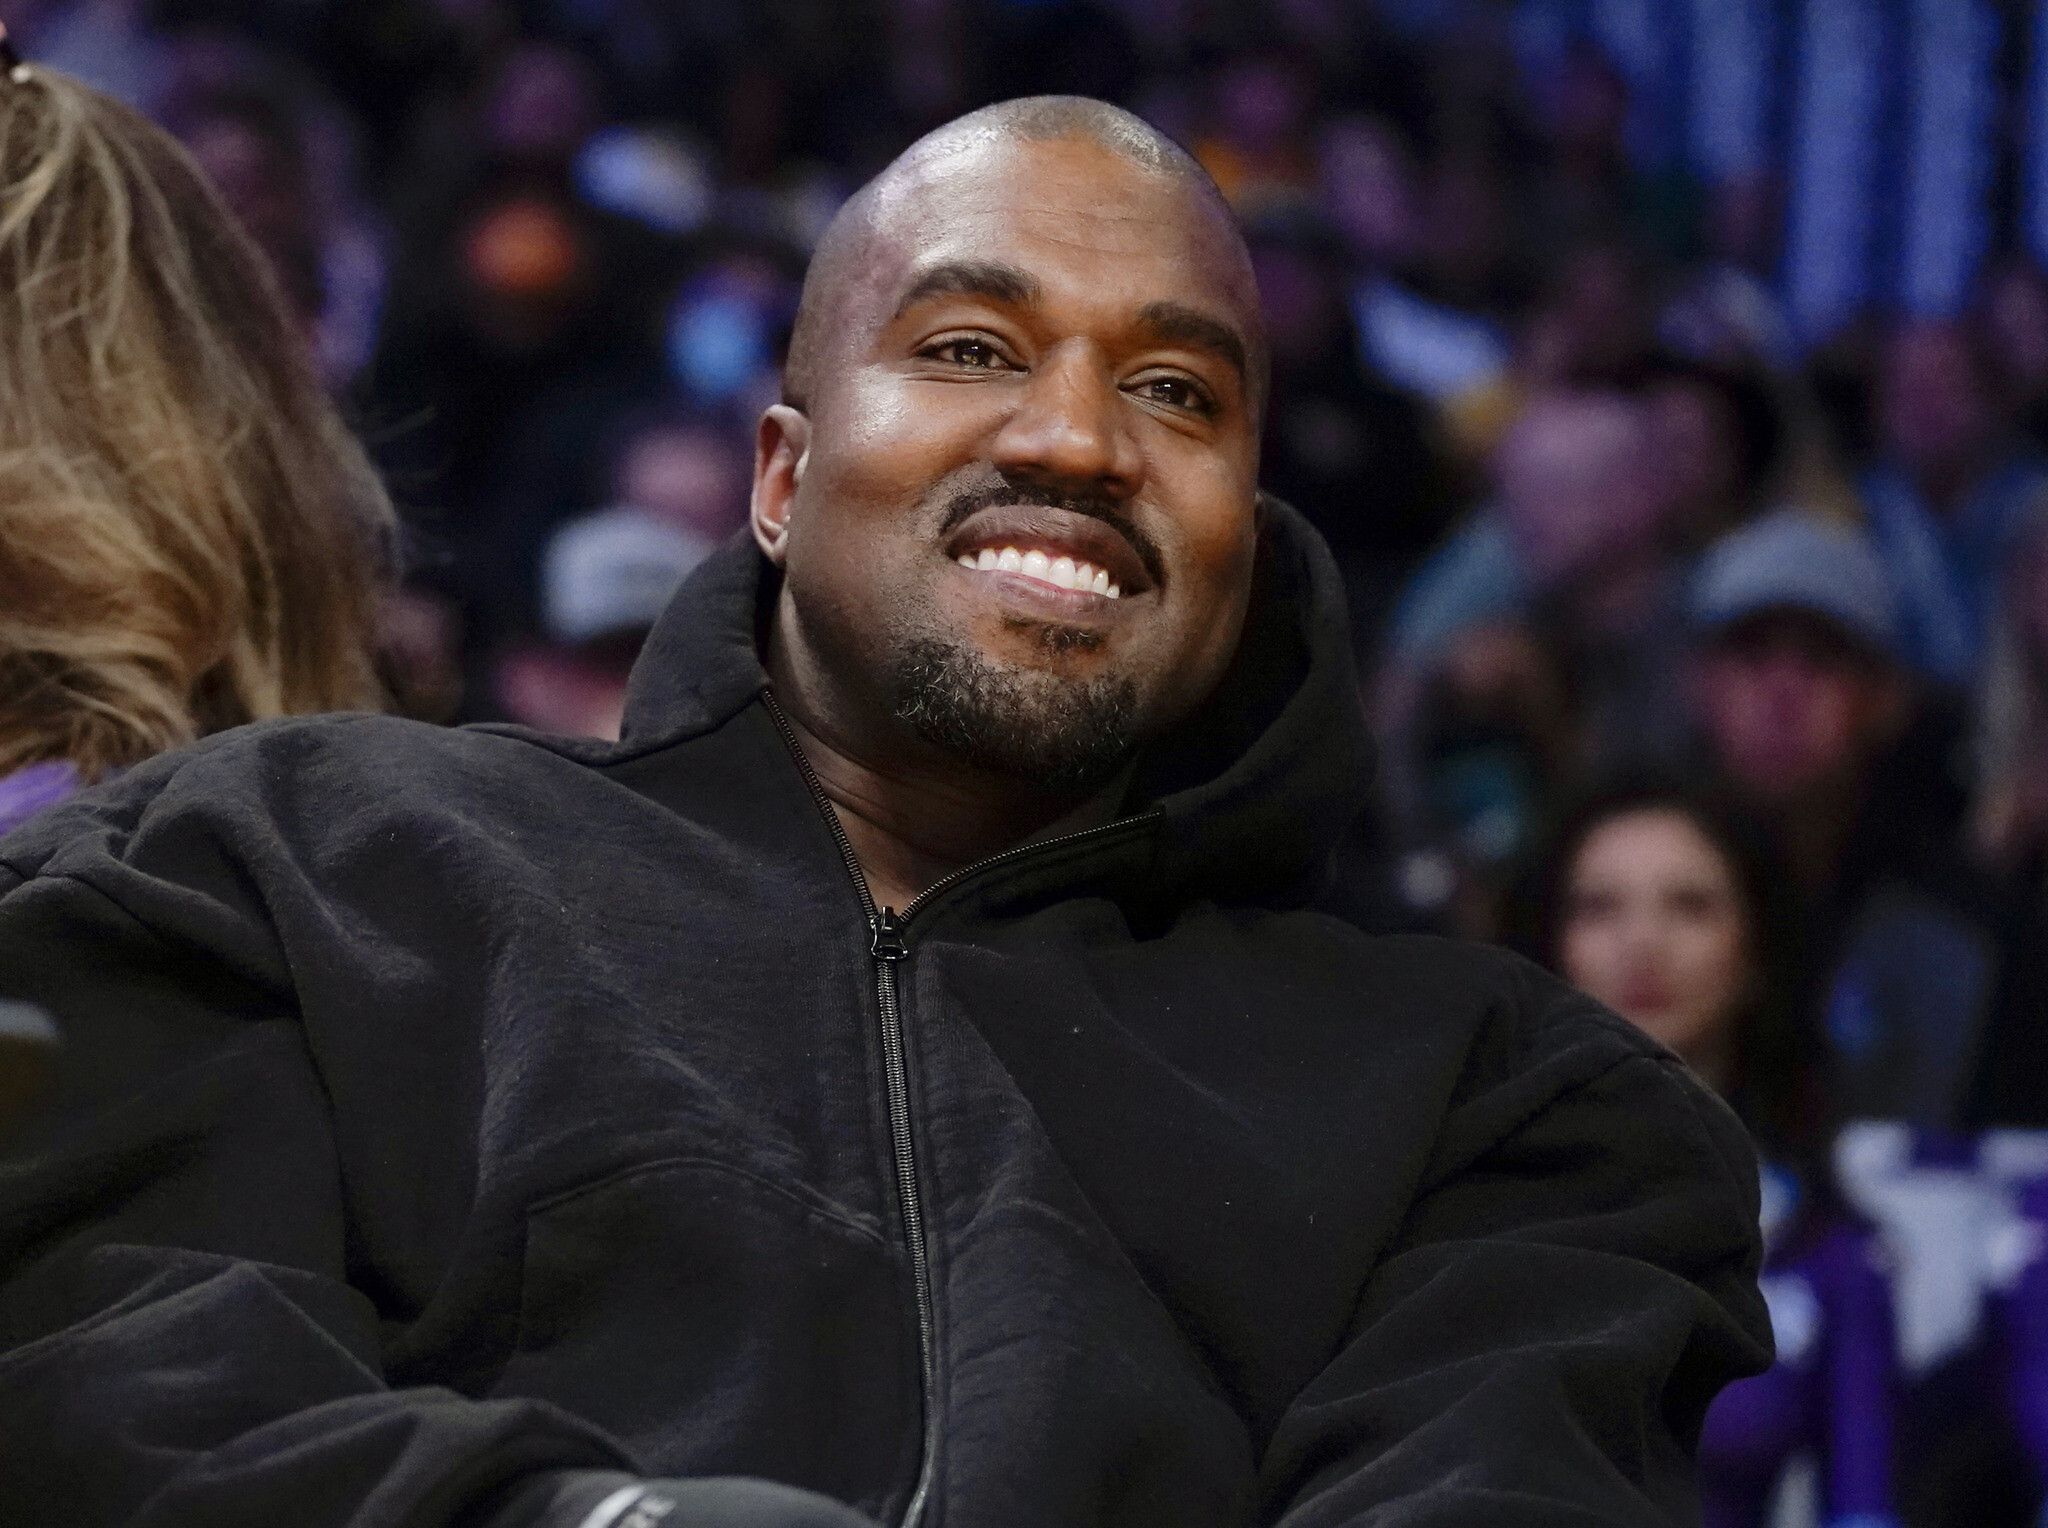 Kanye West Has Already Released New Music–One Week After His Latest Album